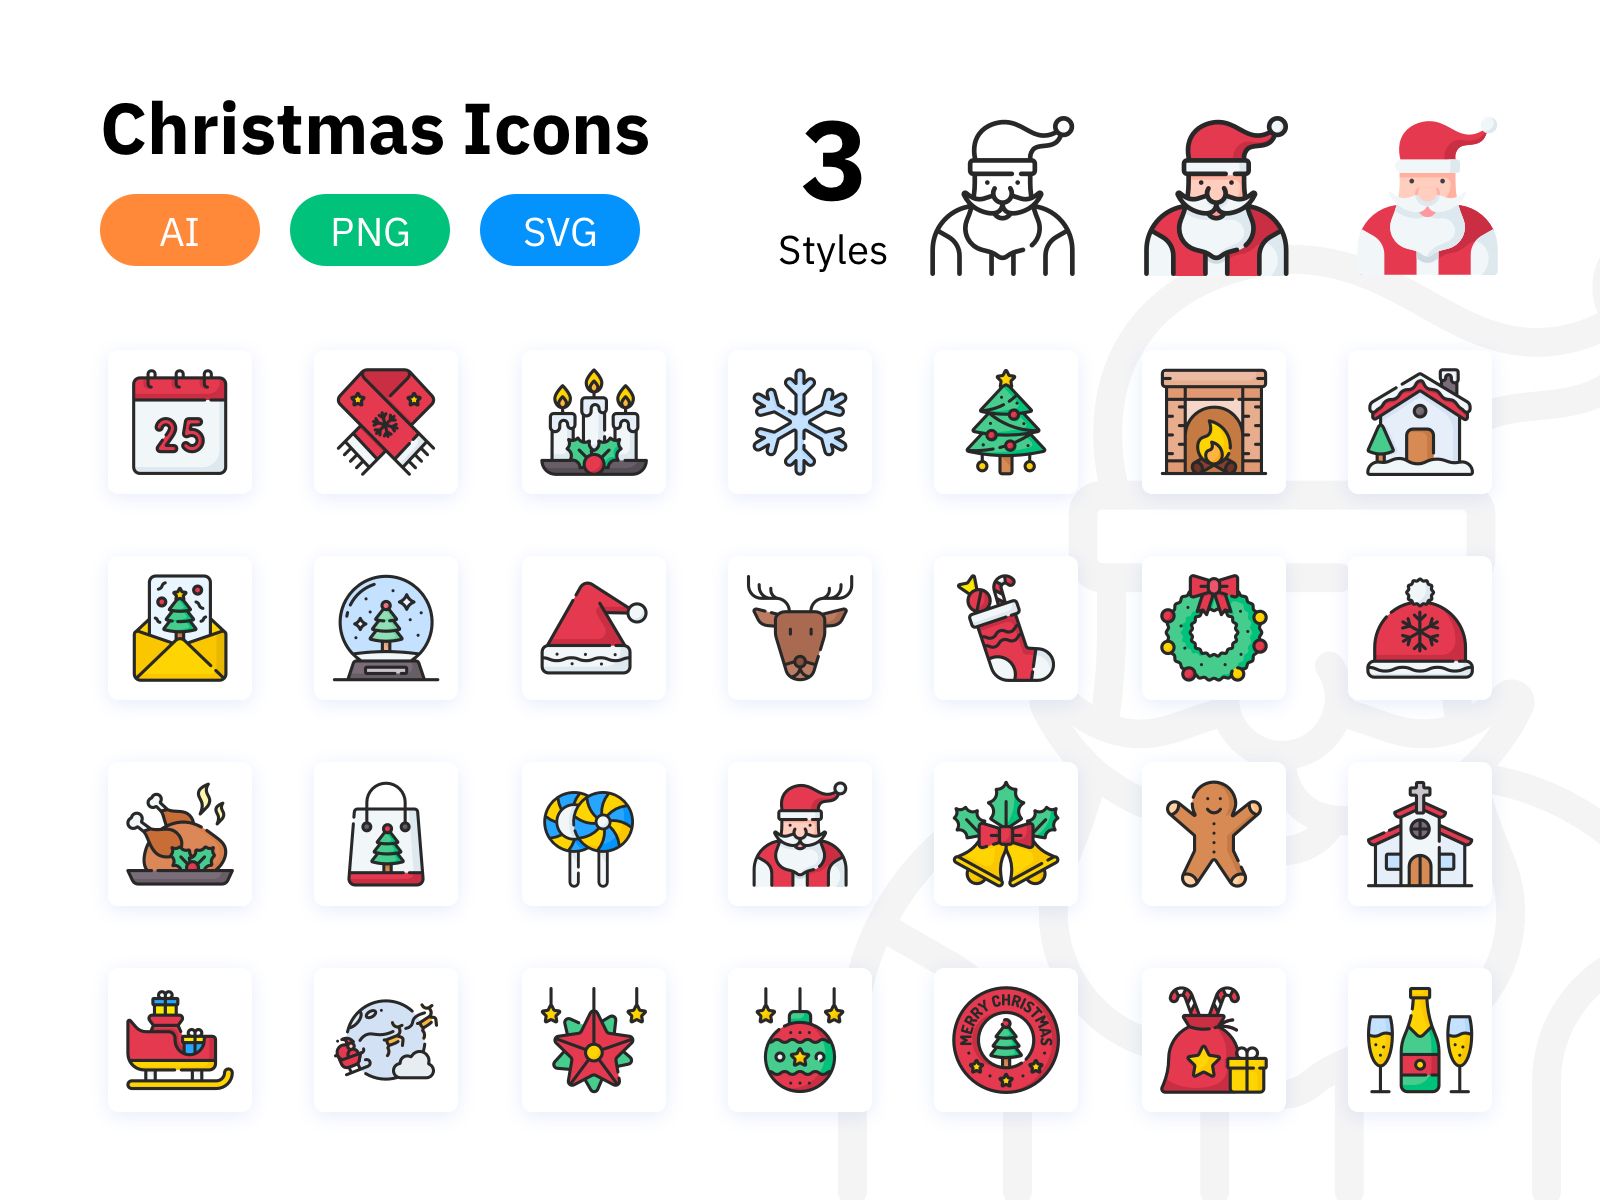 Christmas Icon Pack by Nickunj for IconScout on Dribbble